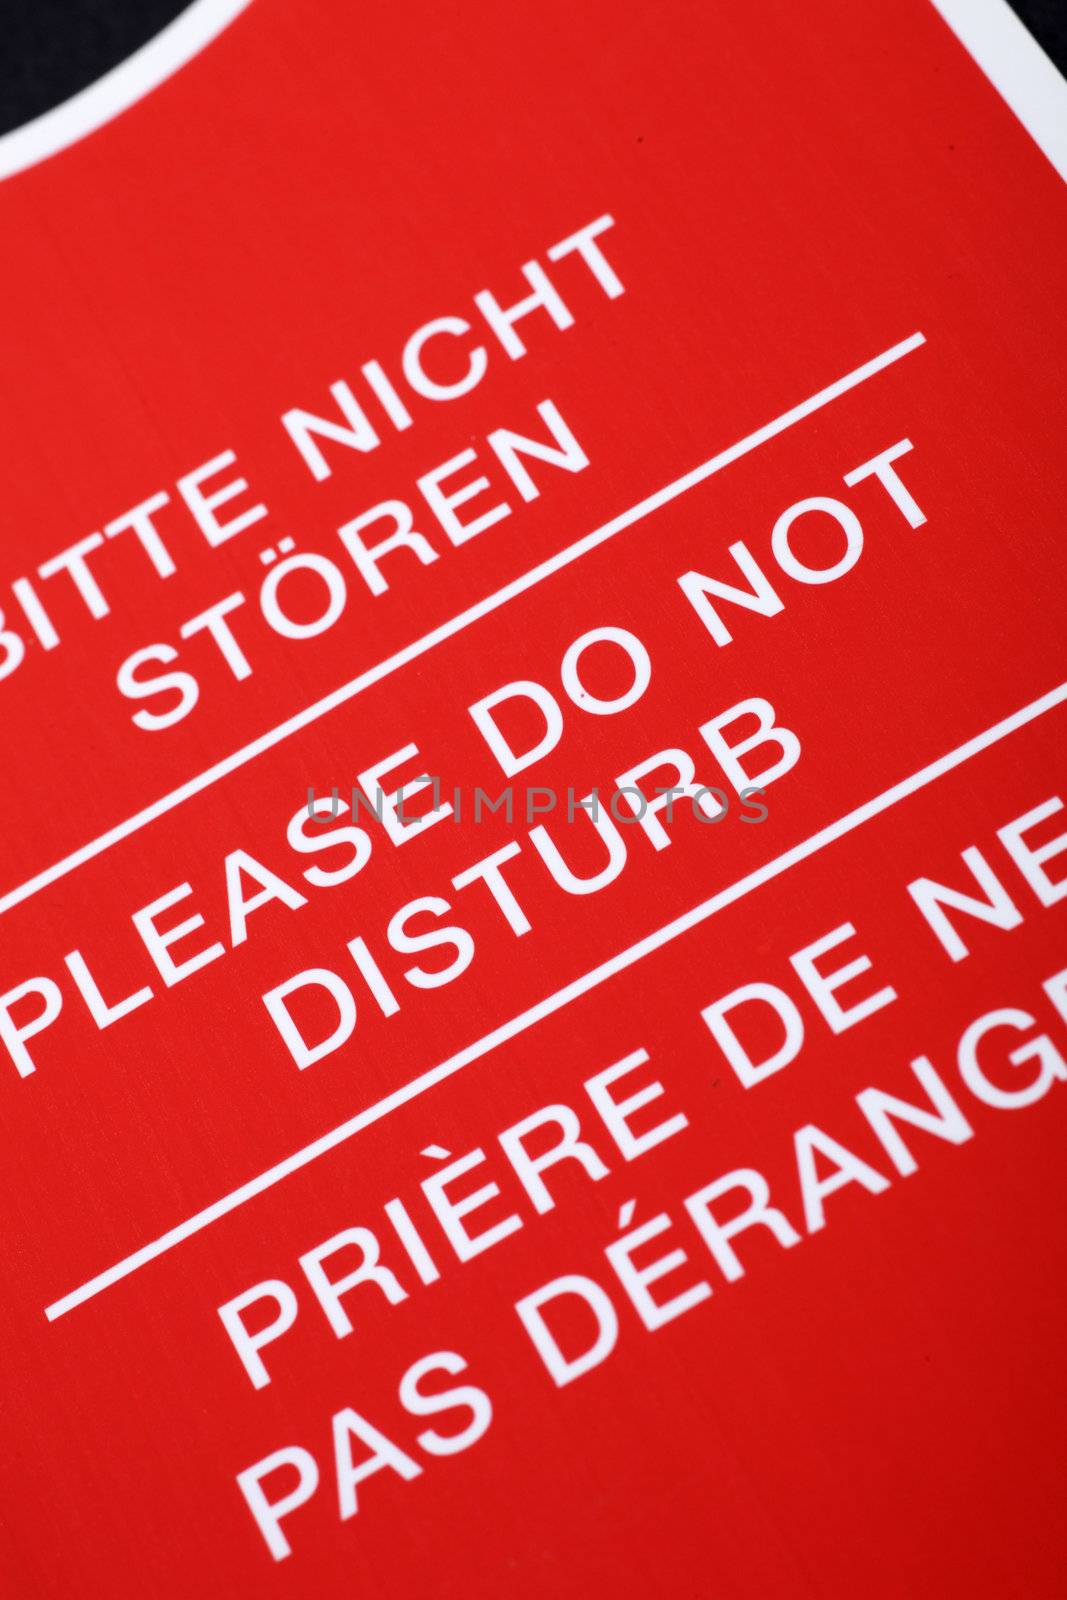 "Do not disturb!" sign written in different languages, close up